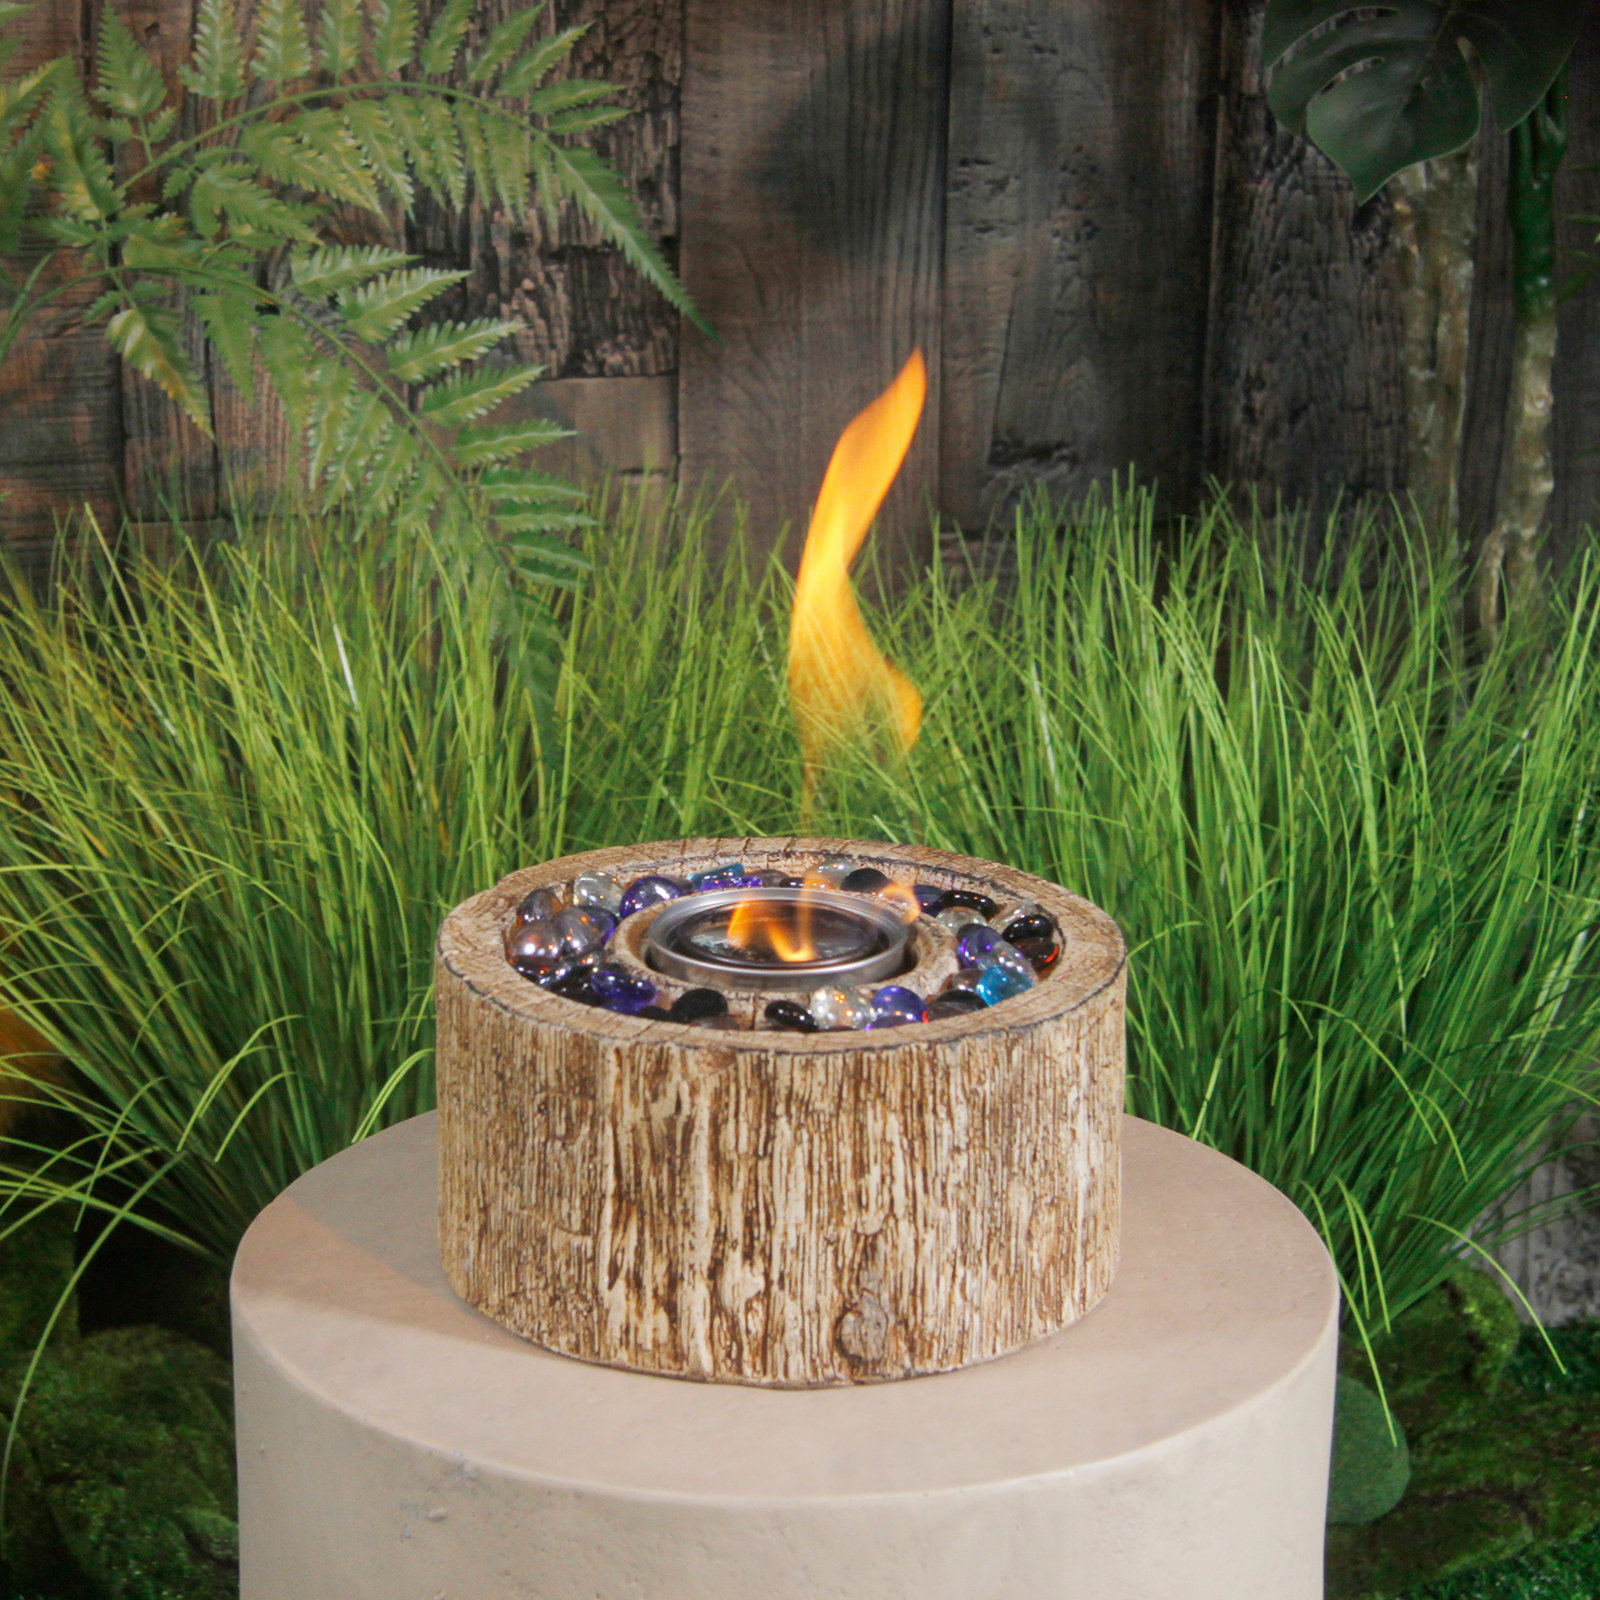 TURBRO Ceramic Tabletop Fire Pit for Outdoor - Ventless Fire Bowl